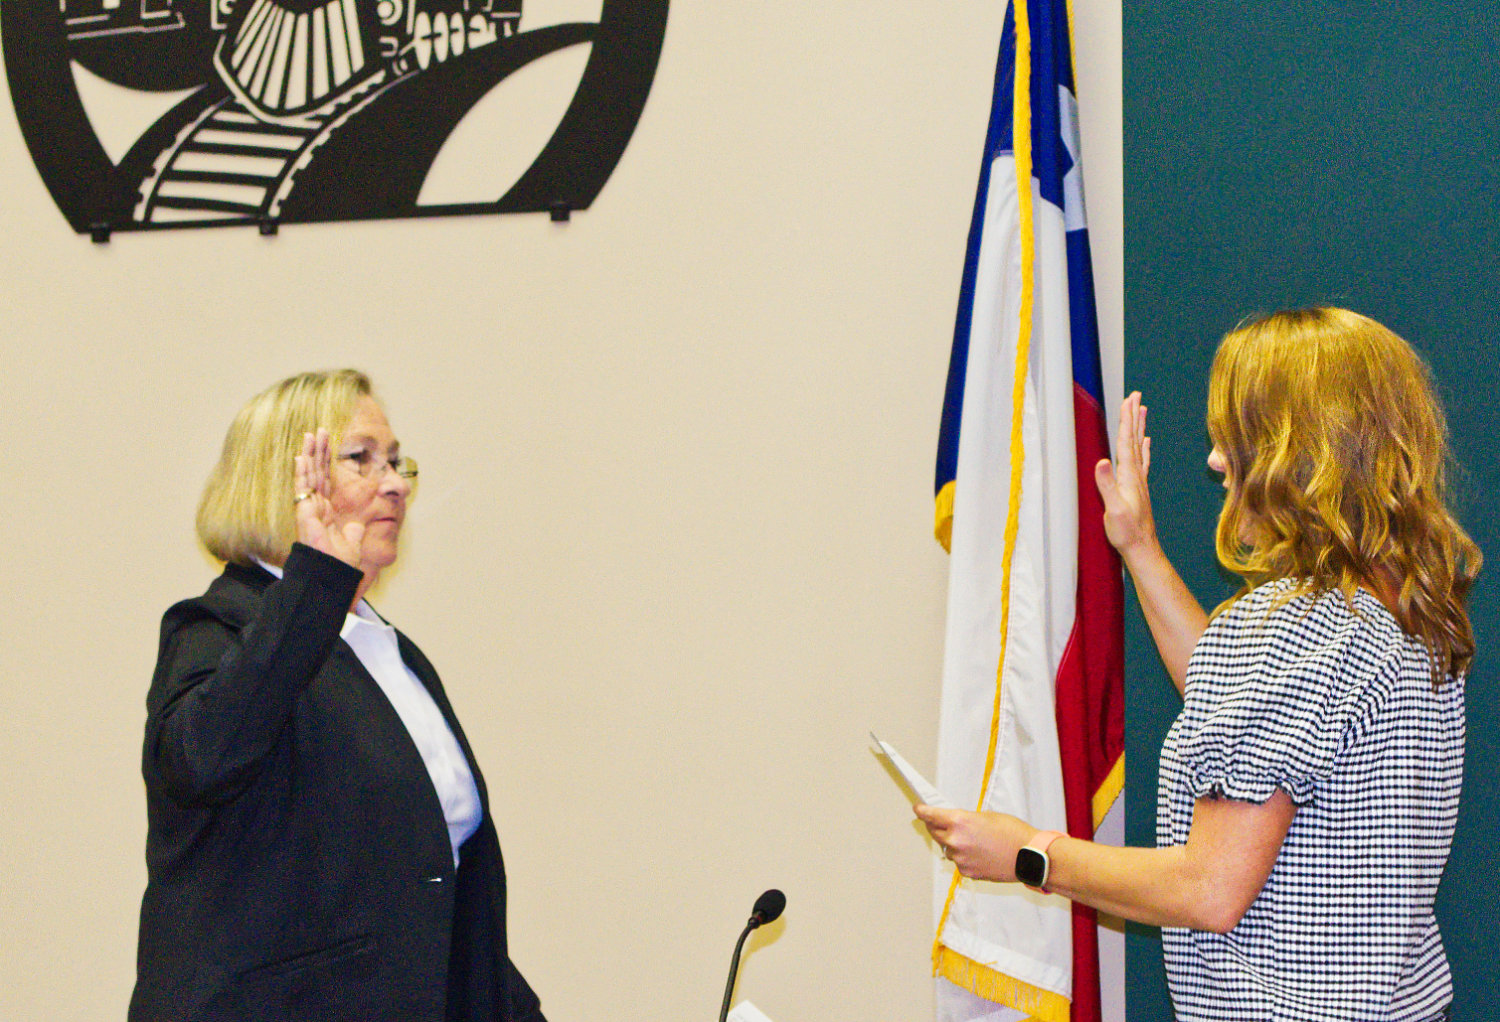 Jayne Lankford, left, is sworn in as mayor of Mineola Monday by City Secretary Cindy Karch.